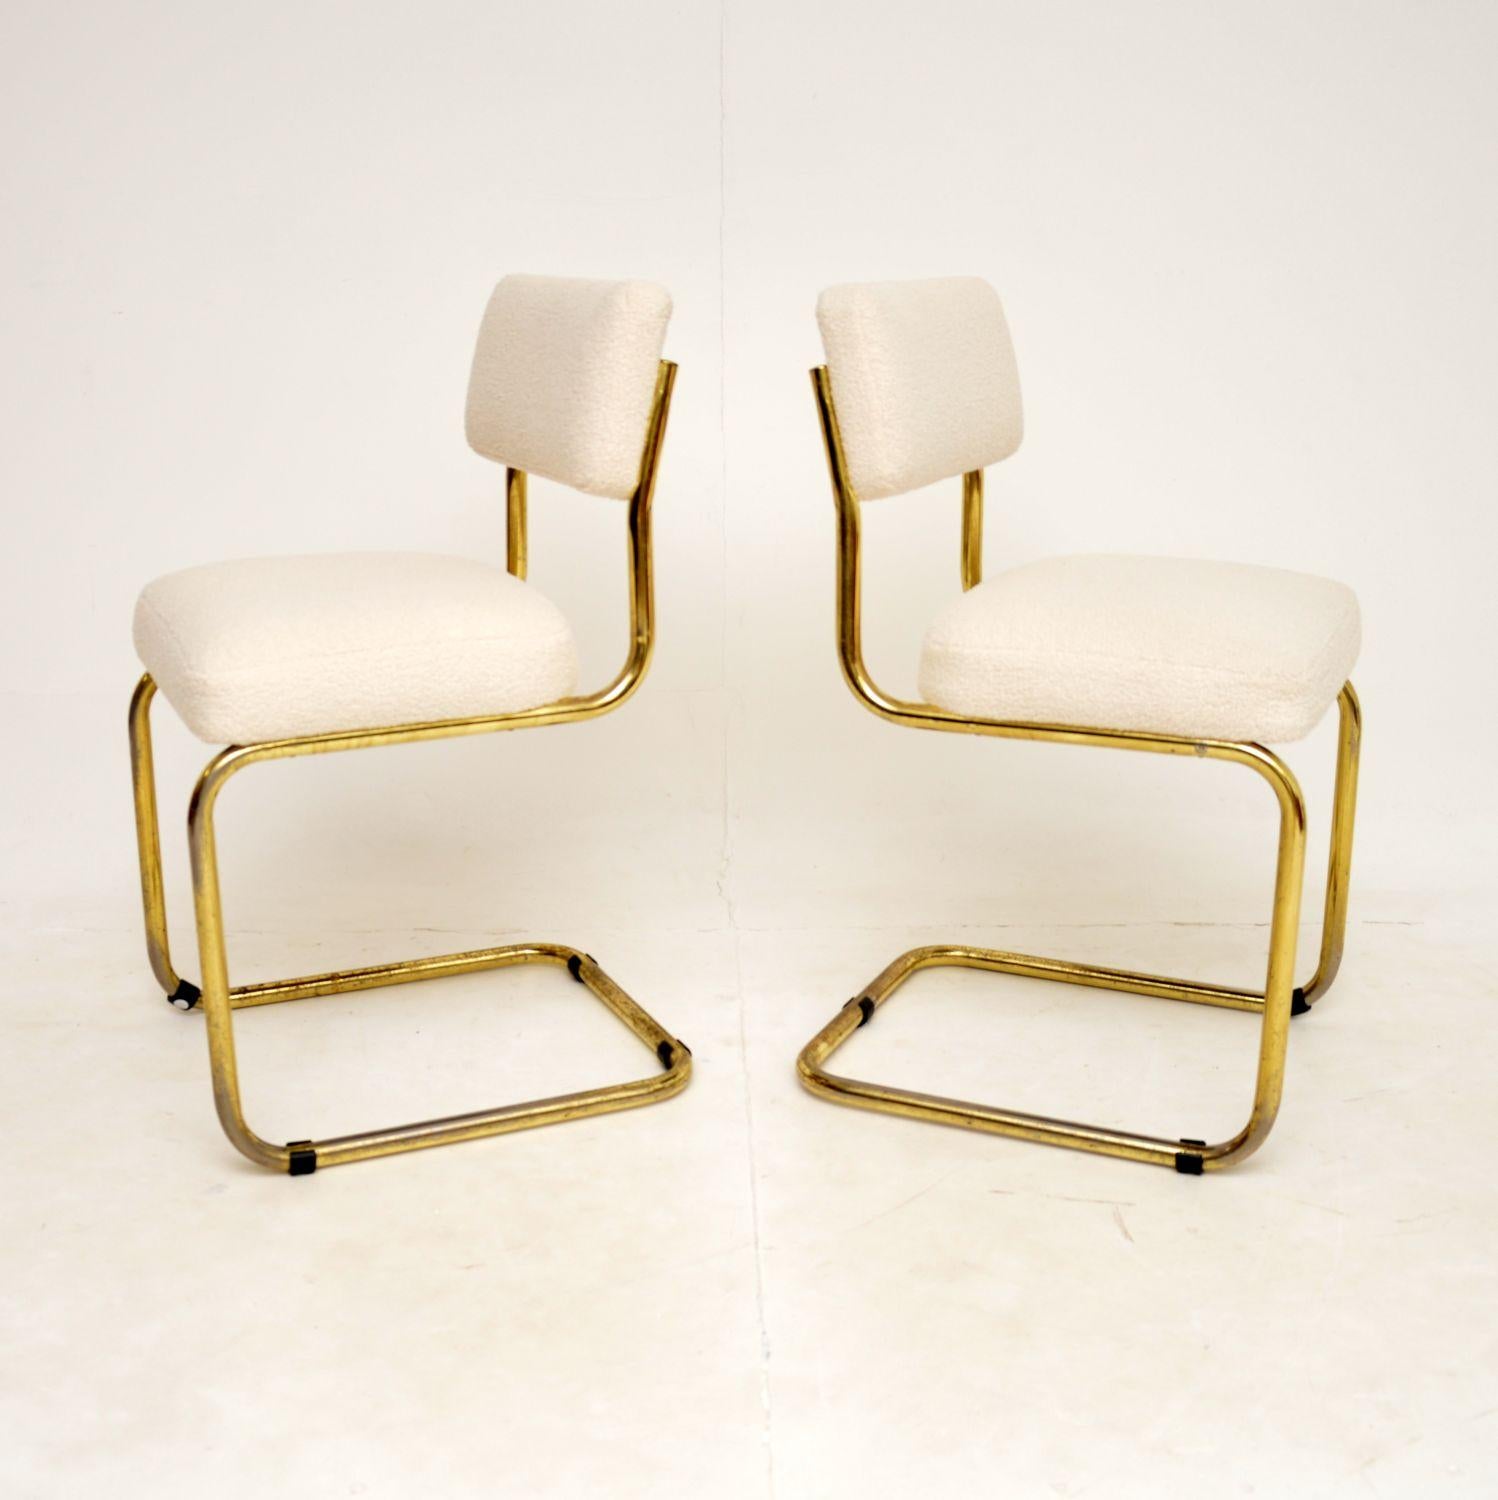 Pair of Vintage Brass Cantilever Dining Chairs 1